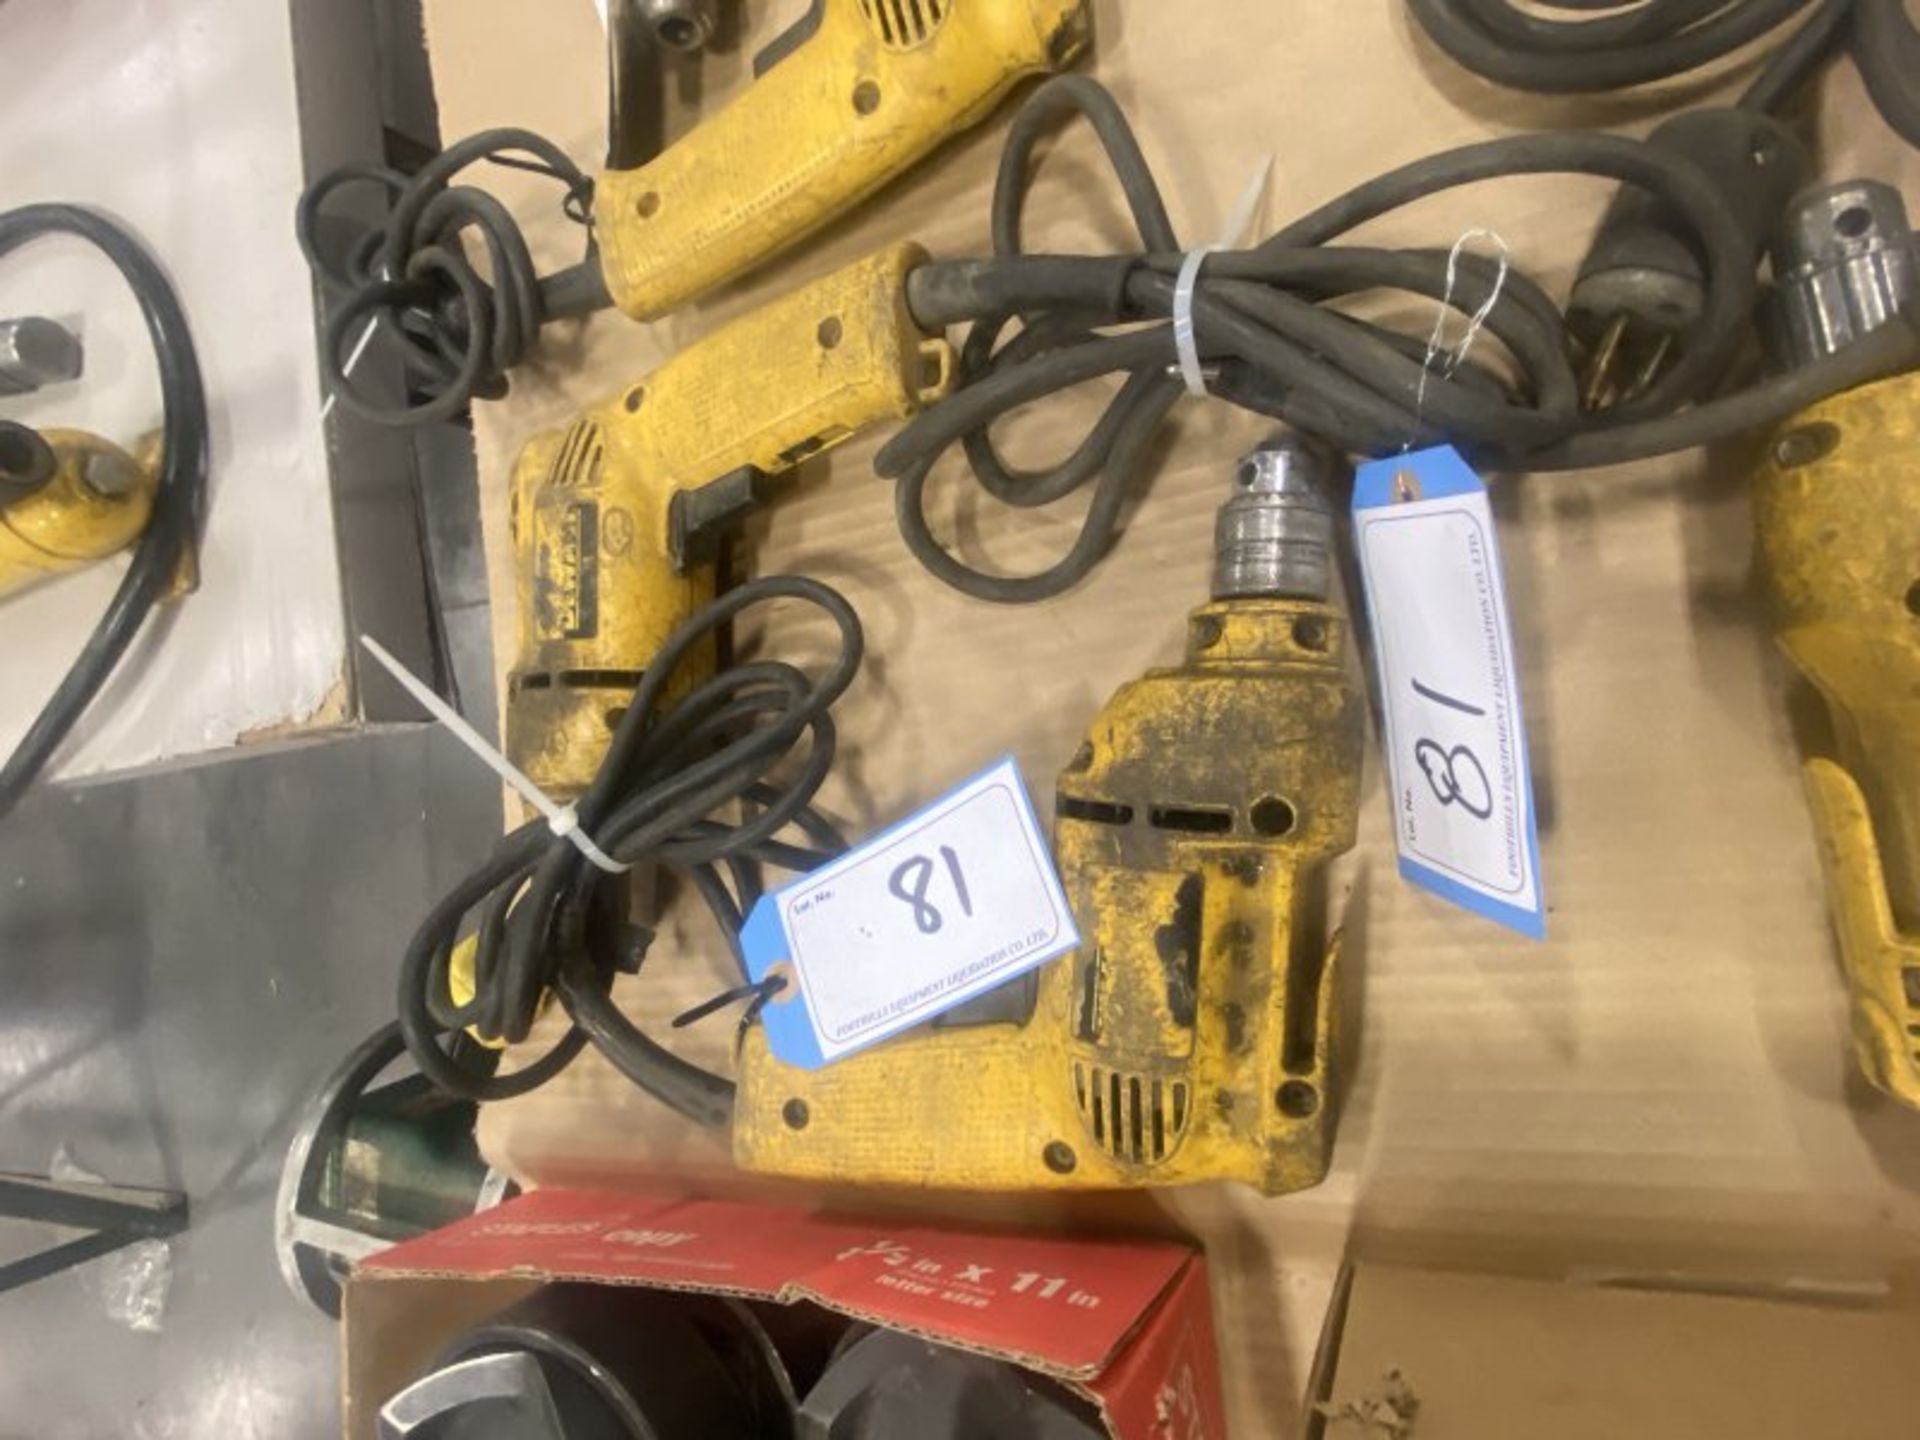 2 - 3/8IN ELECTRIC DRILLS